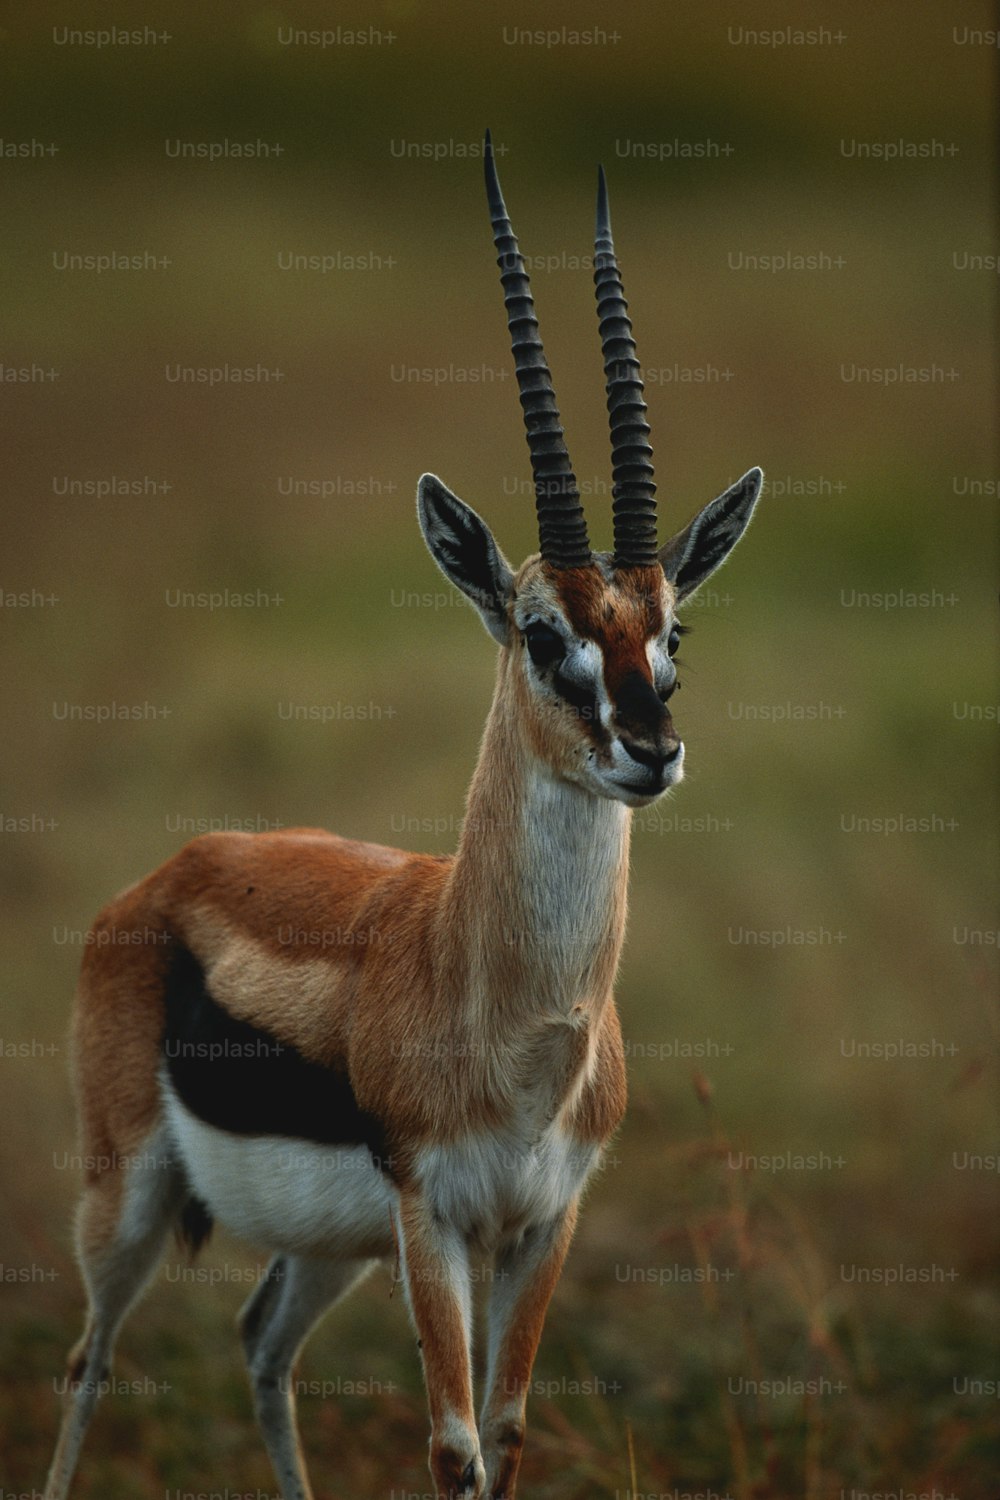 a gazelle with long horns standing in a field